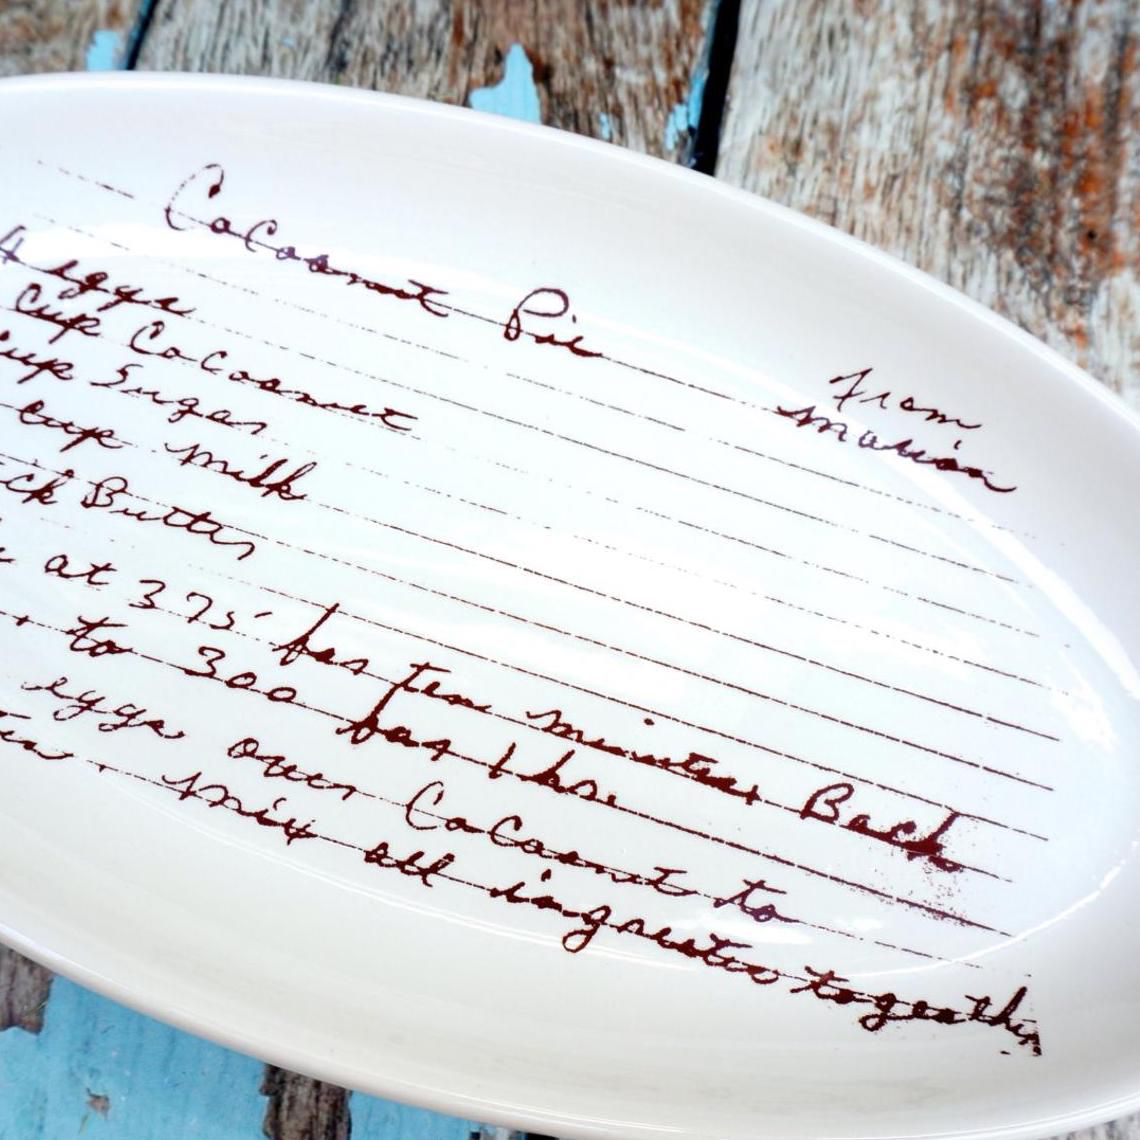 glazed ceramic oval plate with recipe printed on it